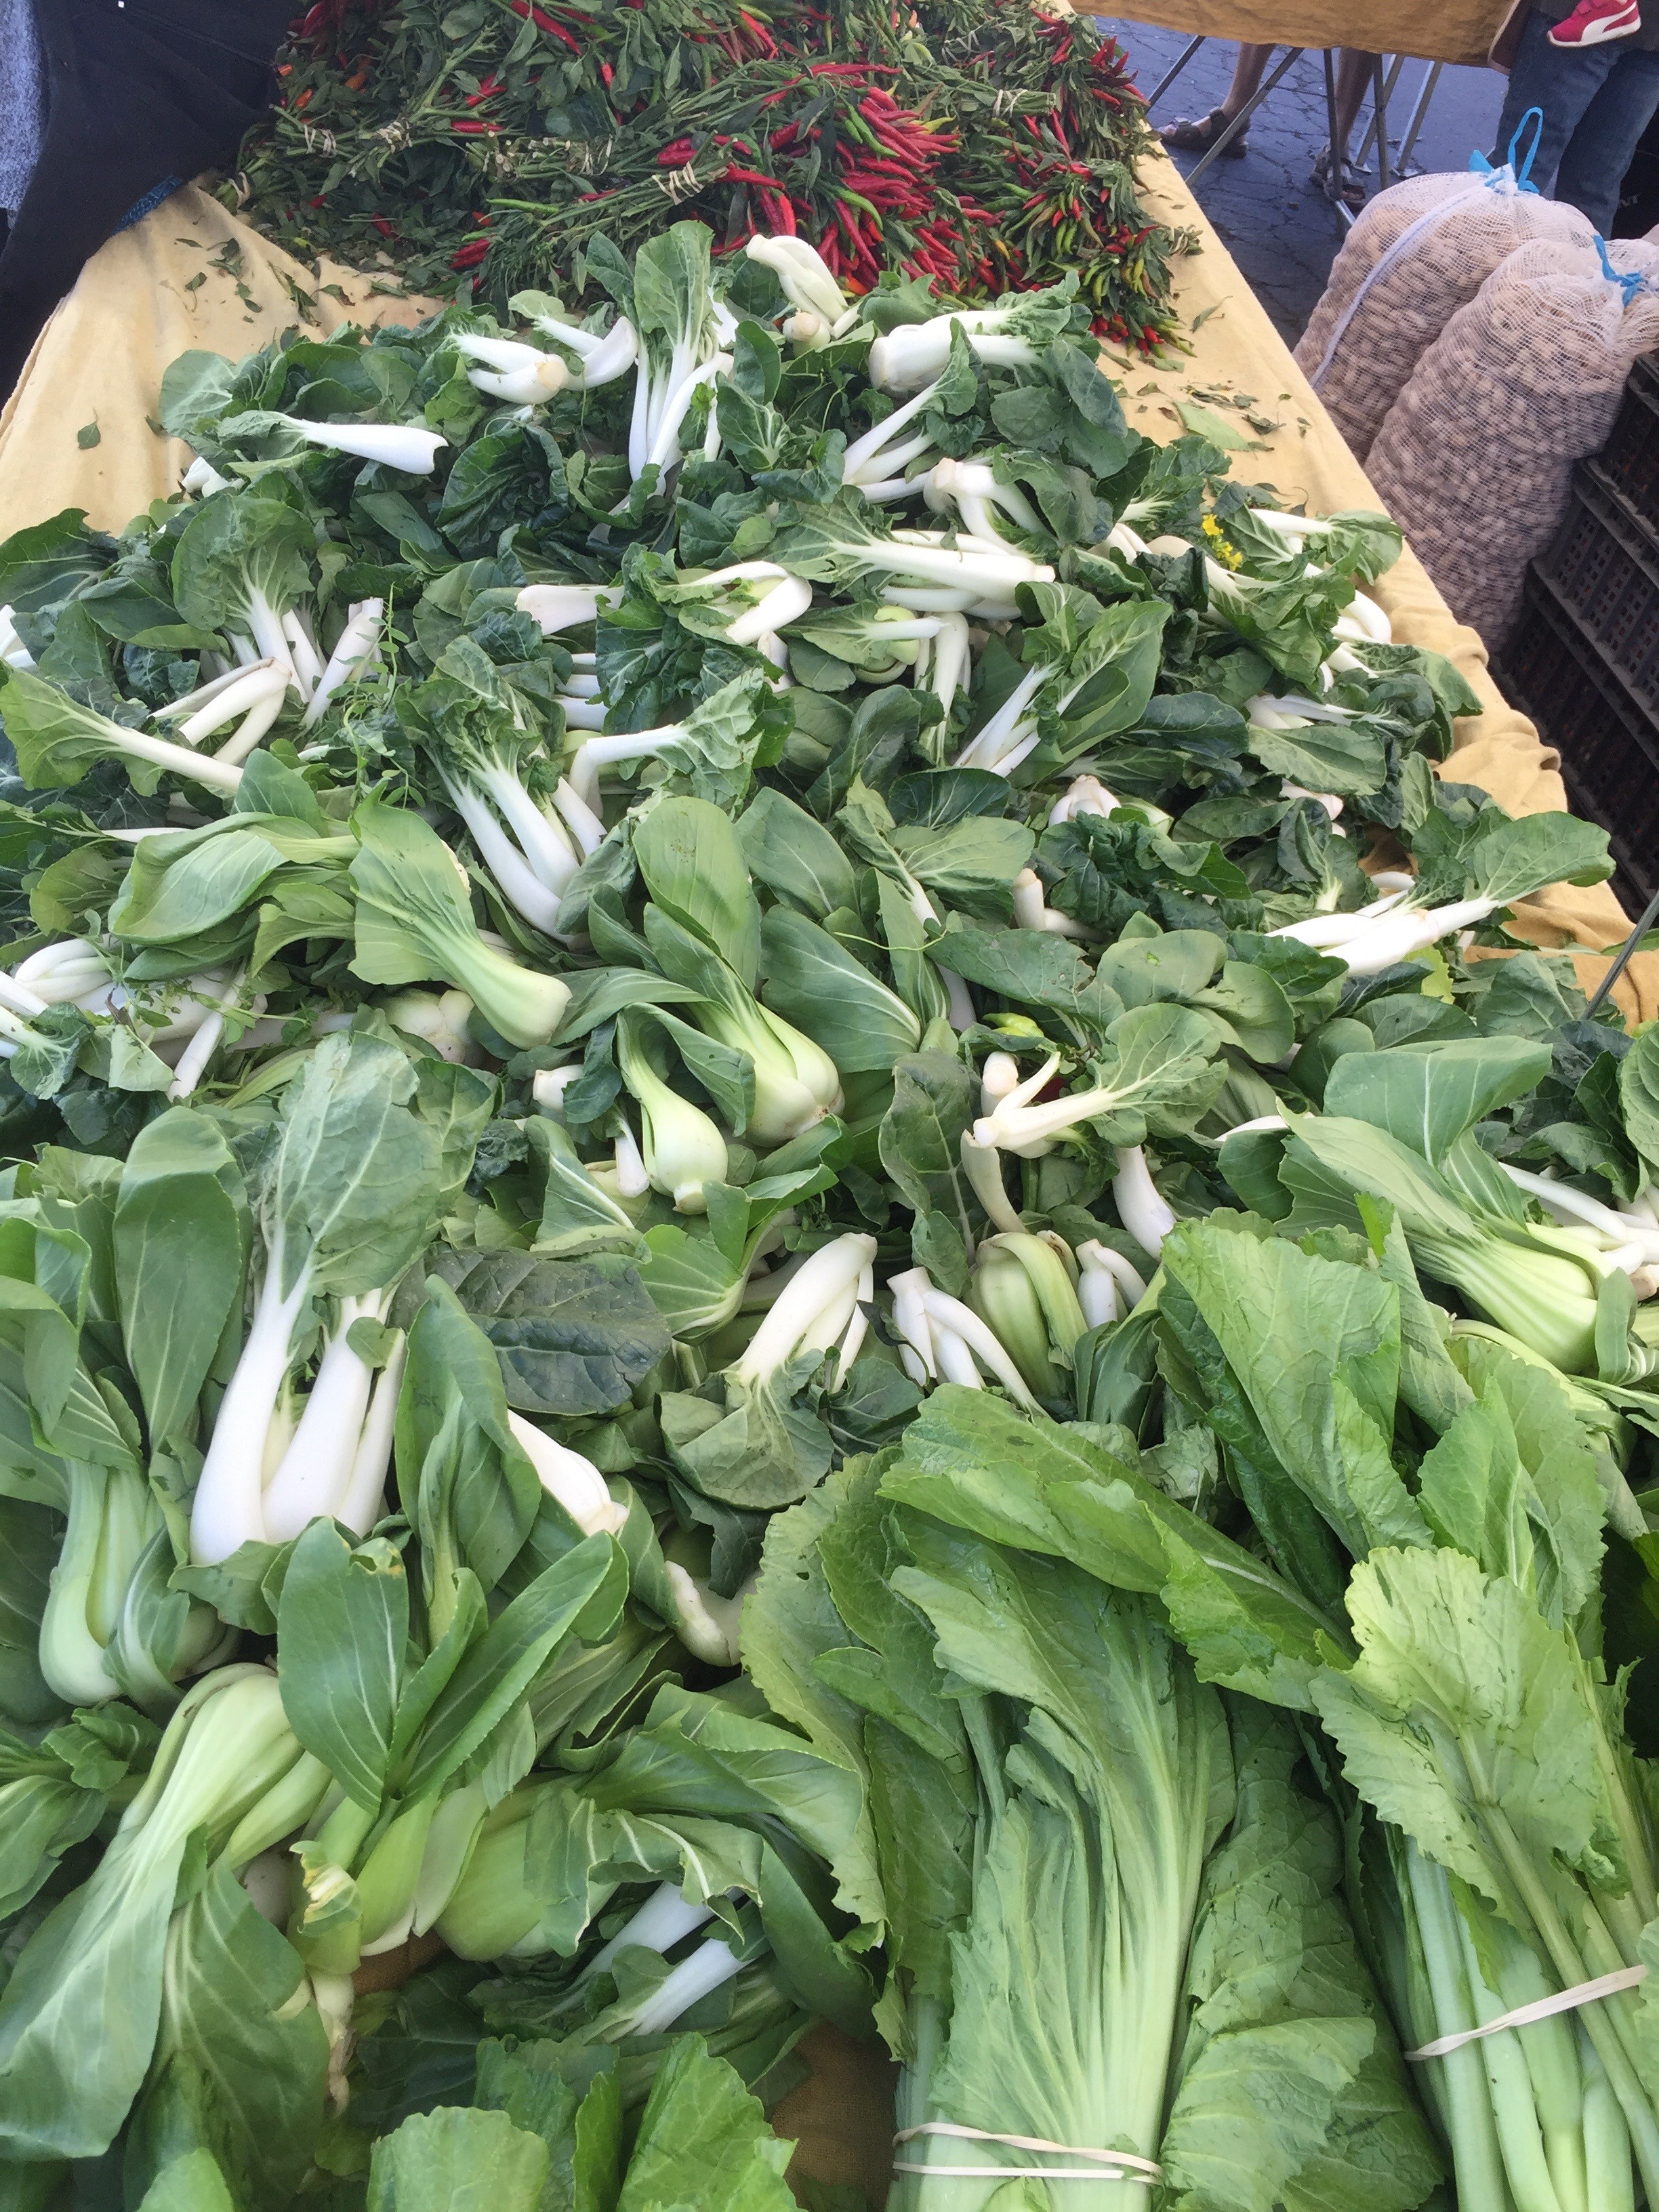 Follow Timaree from the Farmers’ Market into her kitchen – Bok Choy is on the menu!